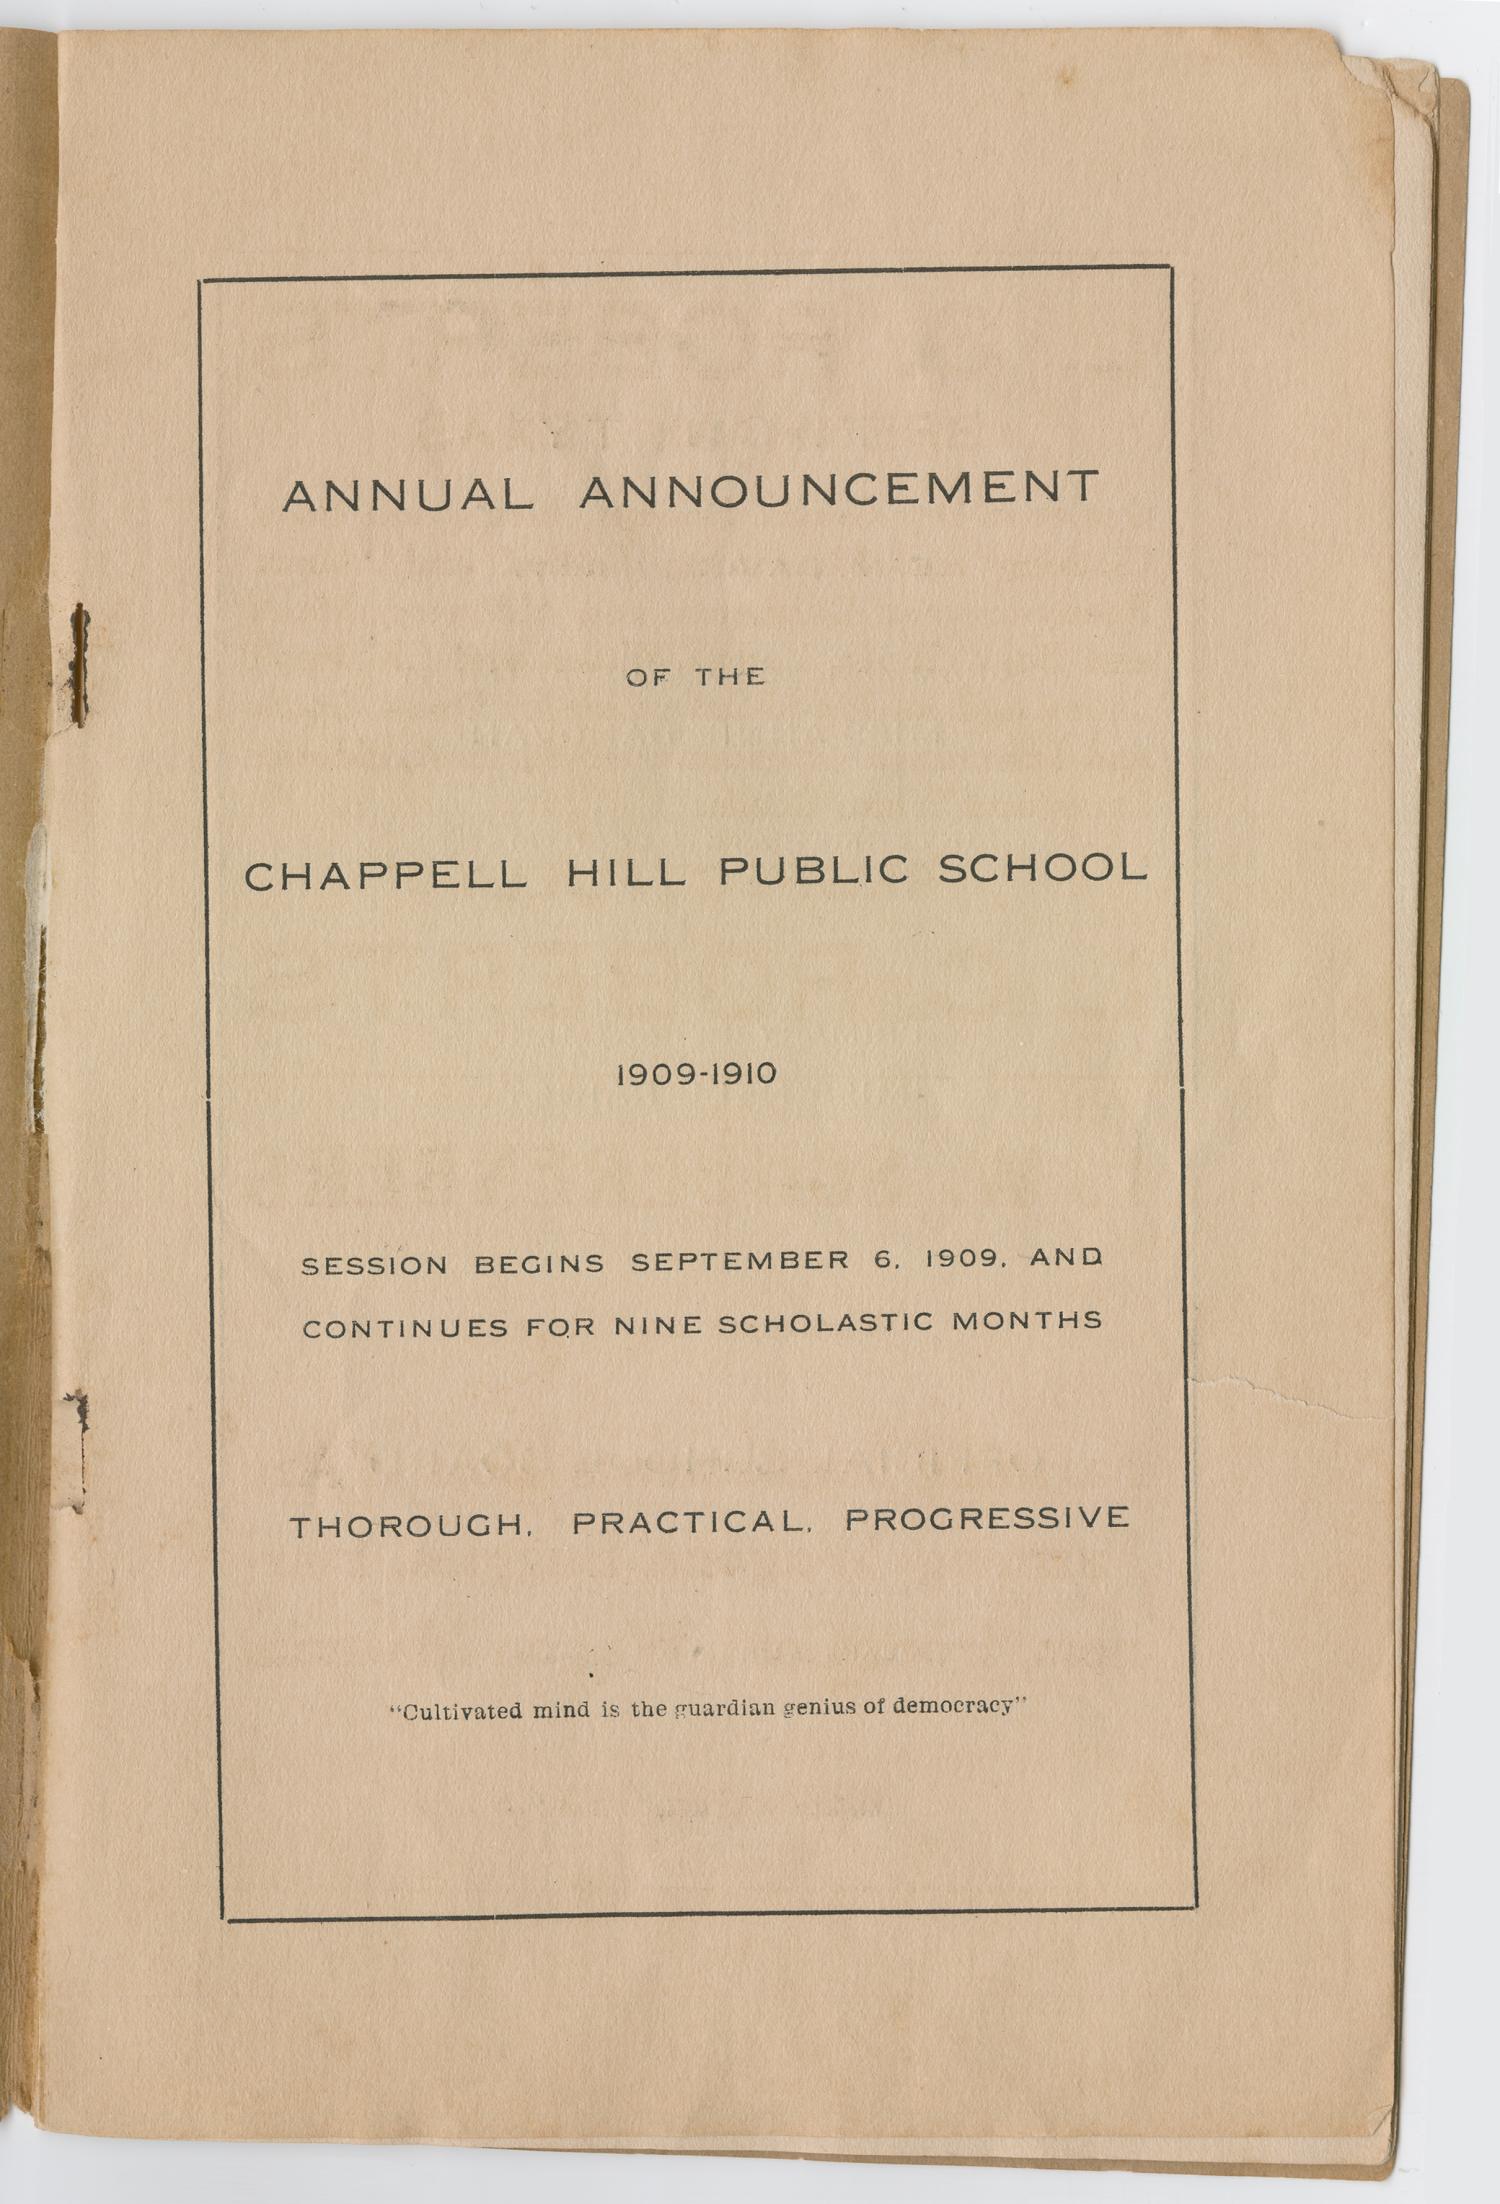 Catalog of Chappell Hill Public School, 1909-1910
                                                
                                                    [Sequence #]: 3 of 22
                                                